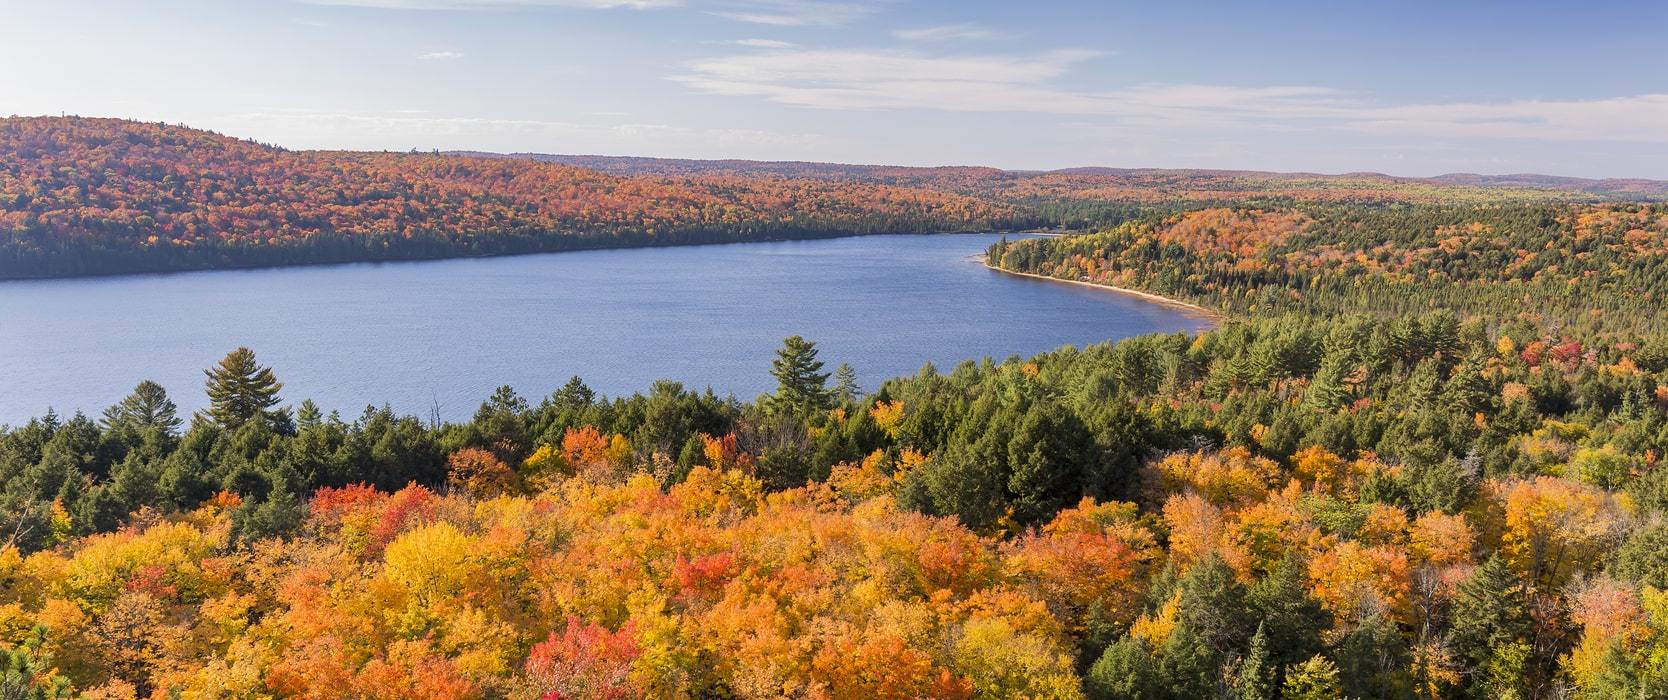 Panoramic view of vibrant green and orange trees near a lake in Haliburton County